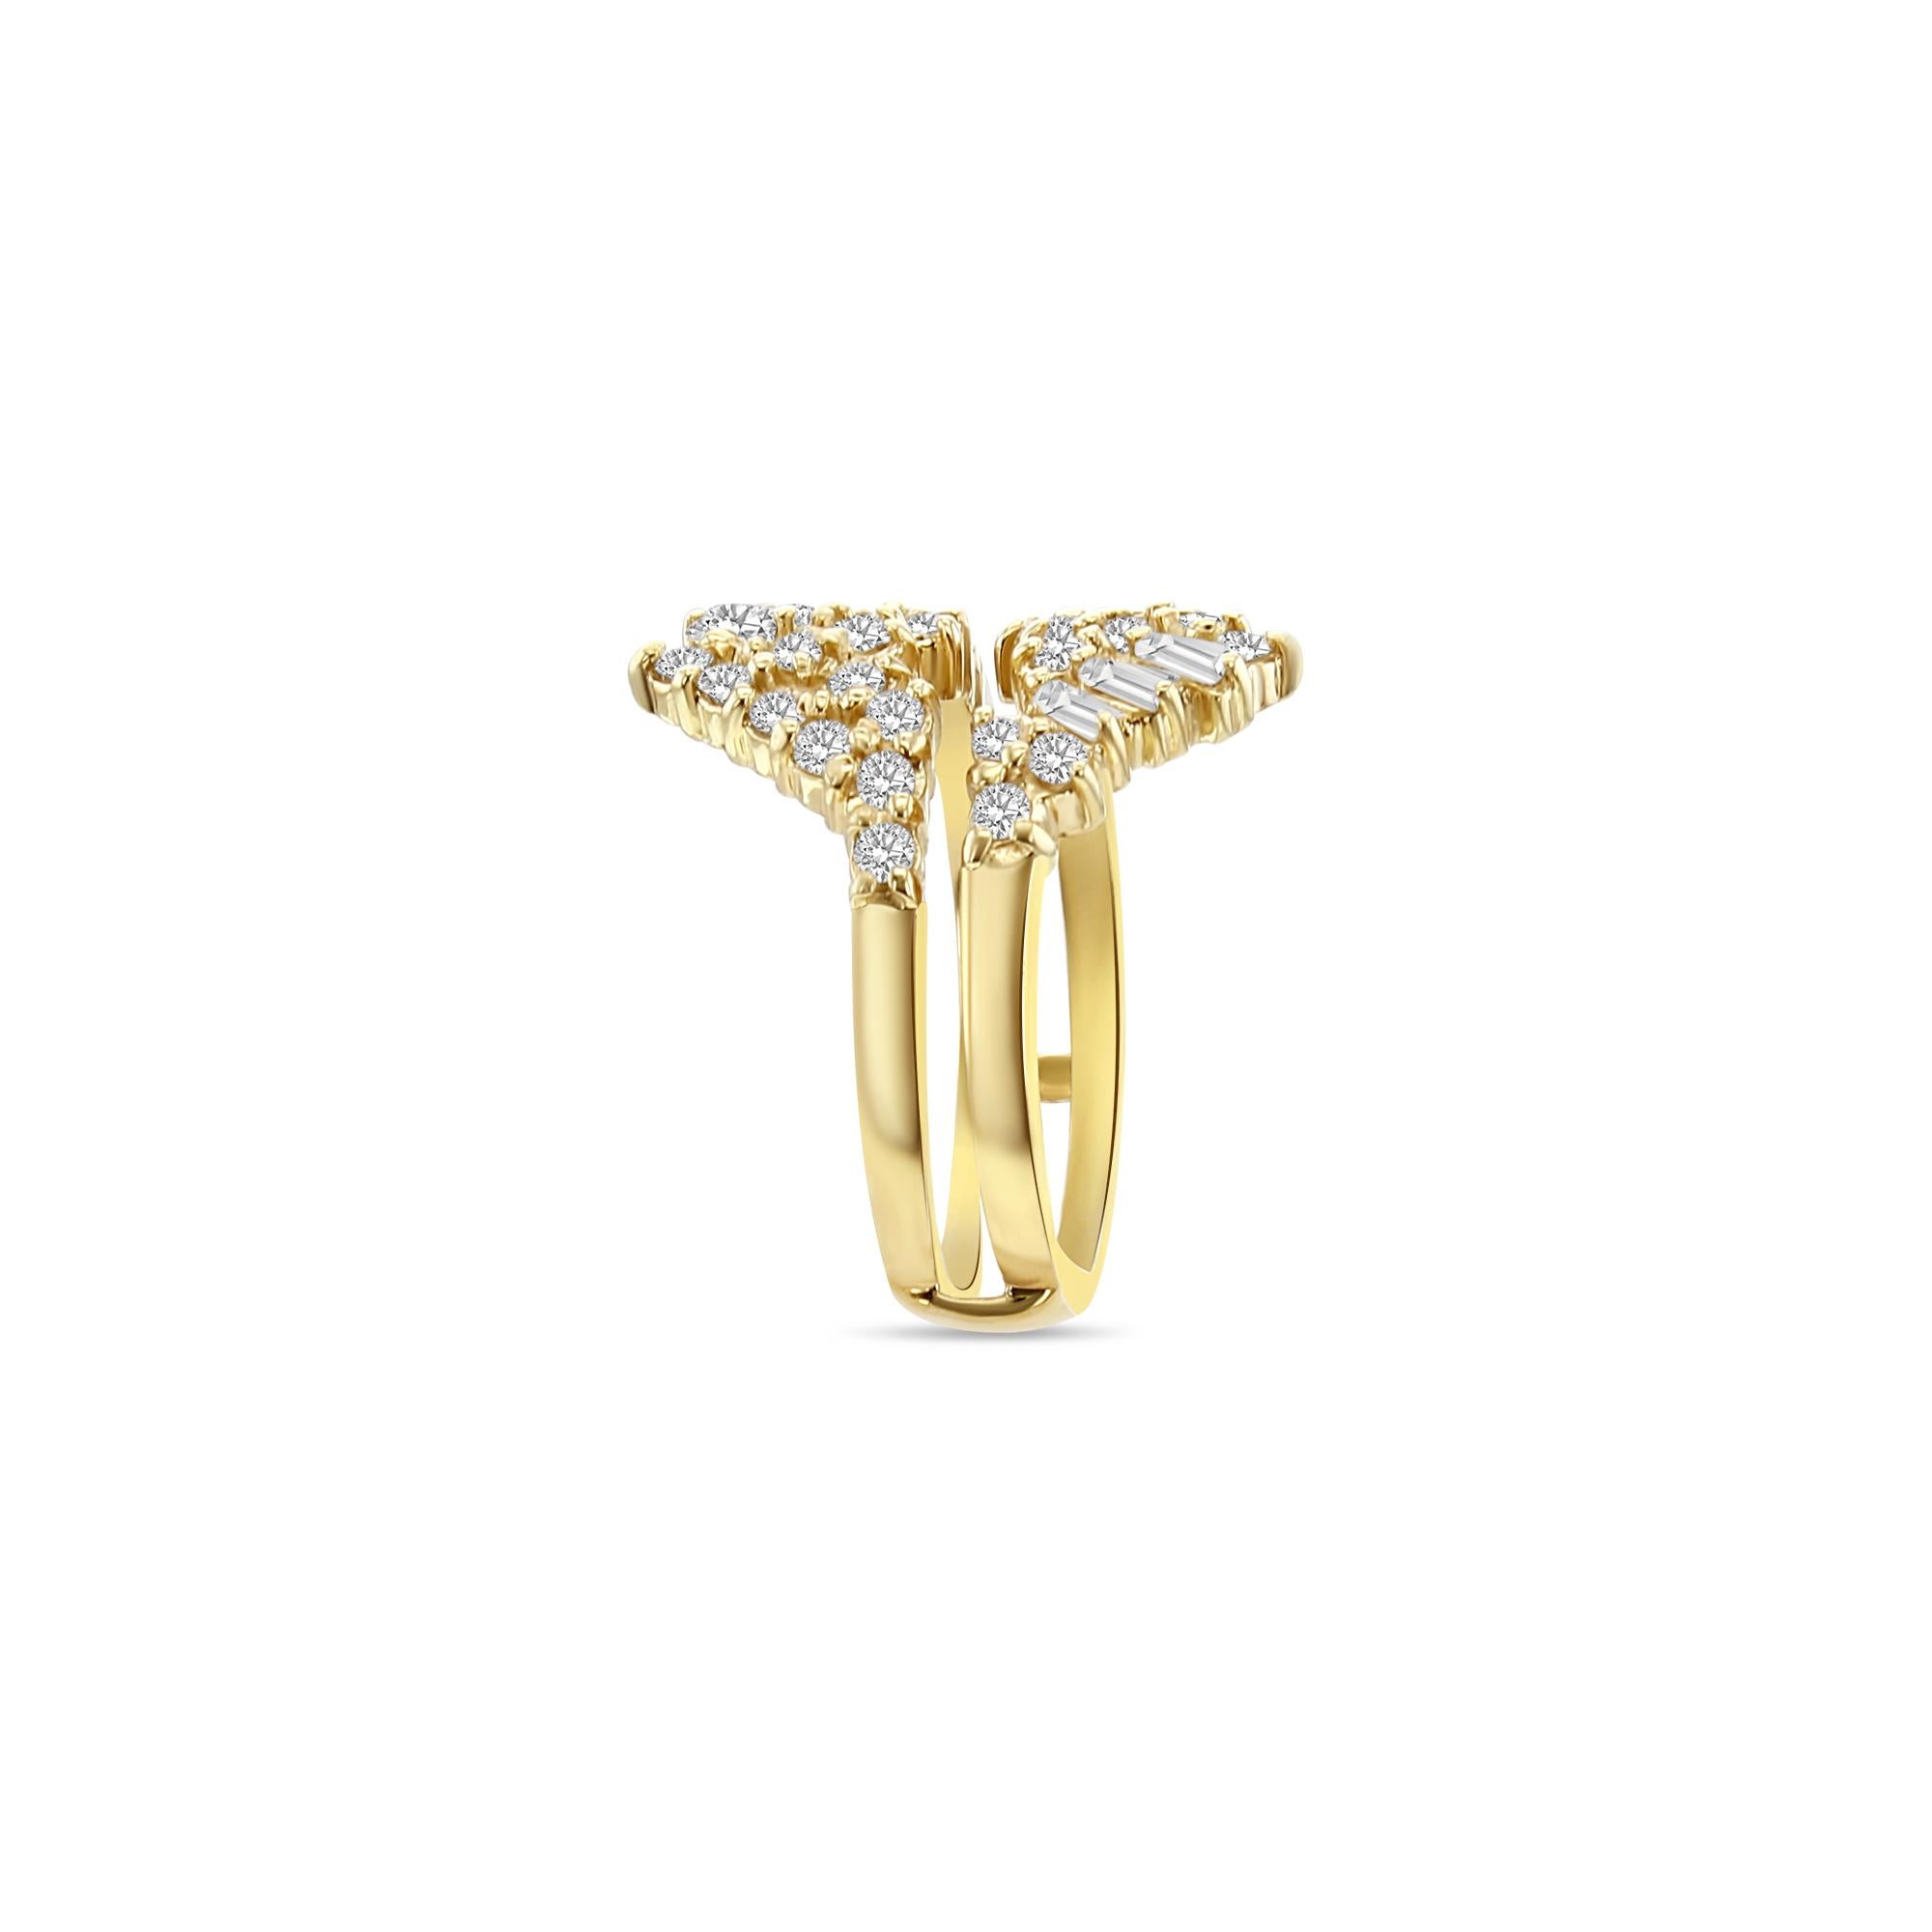 ♥ Ring Summary  ♥

Main Stone: Diamond
Approx. Carat Weight: .75cttw
Stone Cut: Baguette & Round
Band Material: 14k Yellow Gold
Dimension Height: 19mm X 15mm
Weight: 5 grams
**Ring Guard Only 